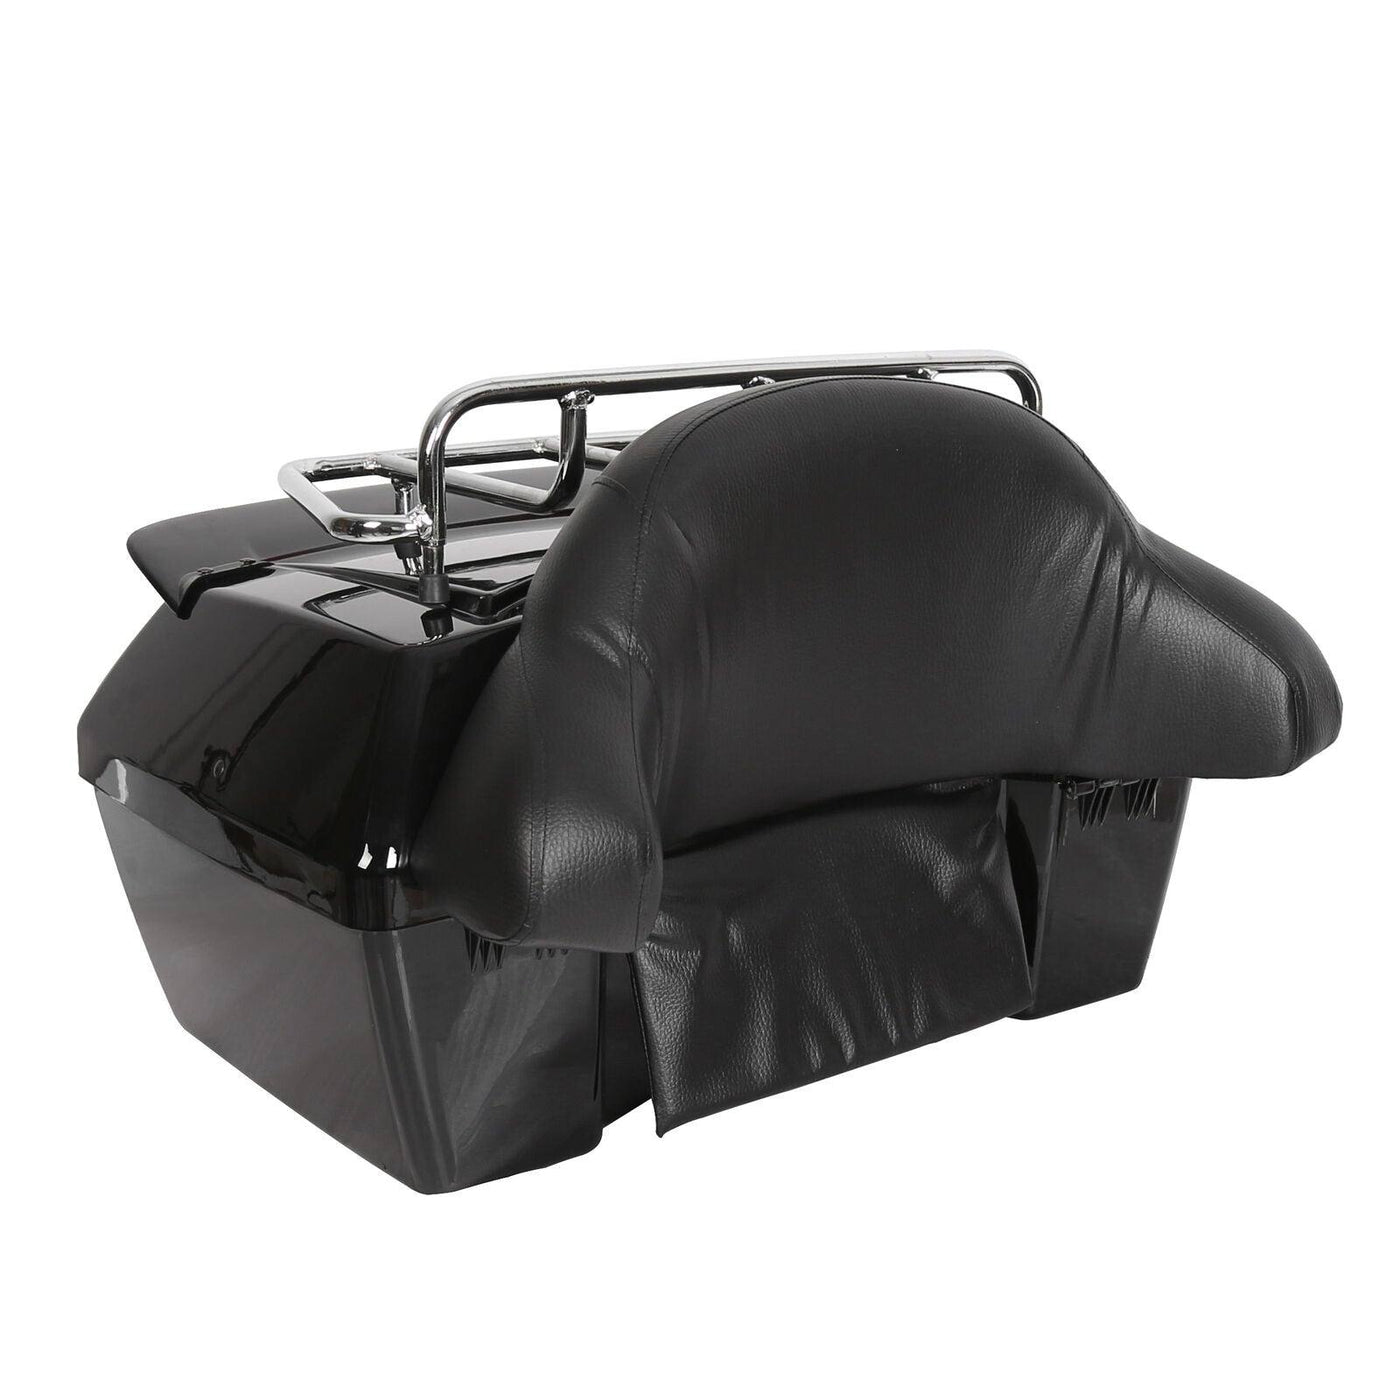 Tour Pack Trunk Tail Luggage Box W/ Light + Top rack + Backrest For Harley Honda - Moto Life Products